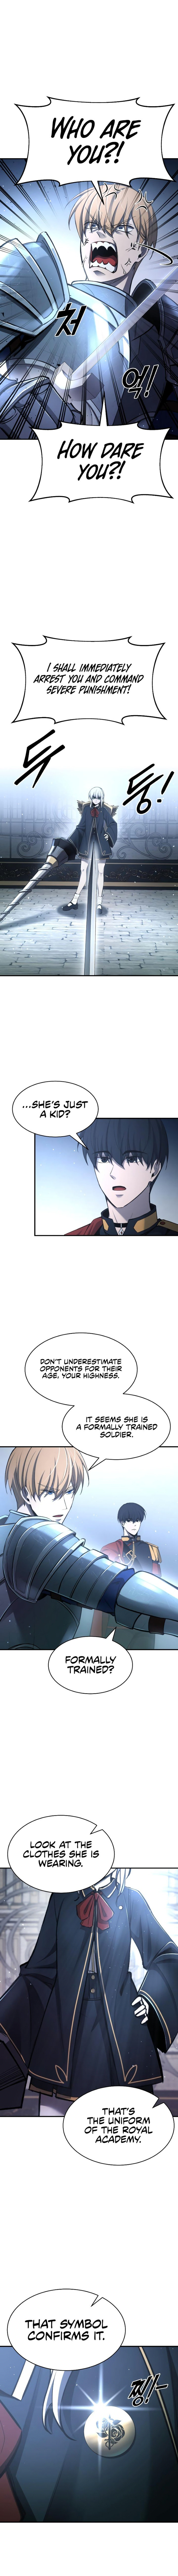 tyrant-of-the-tower-defense-game-chap-35-4